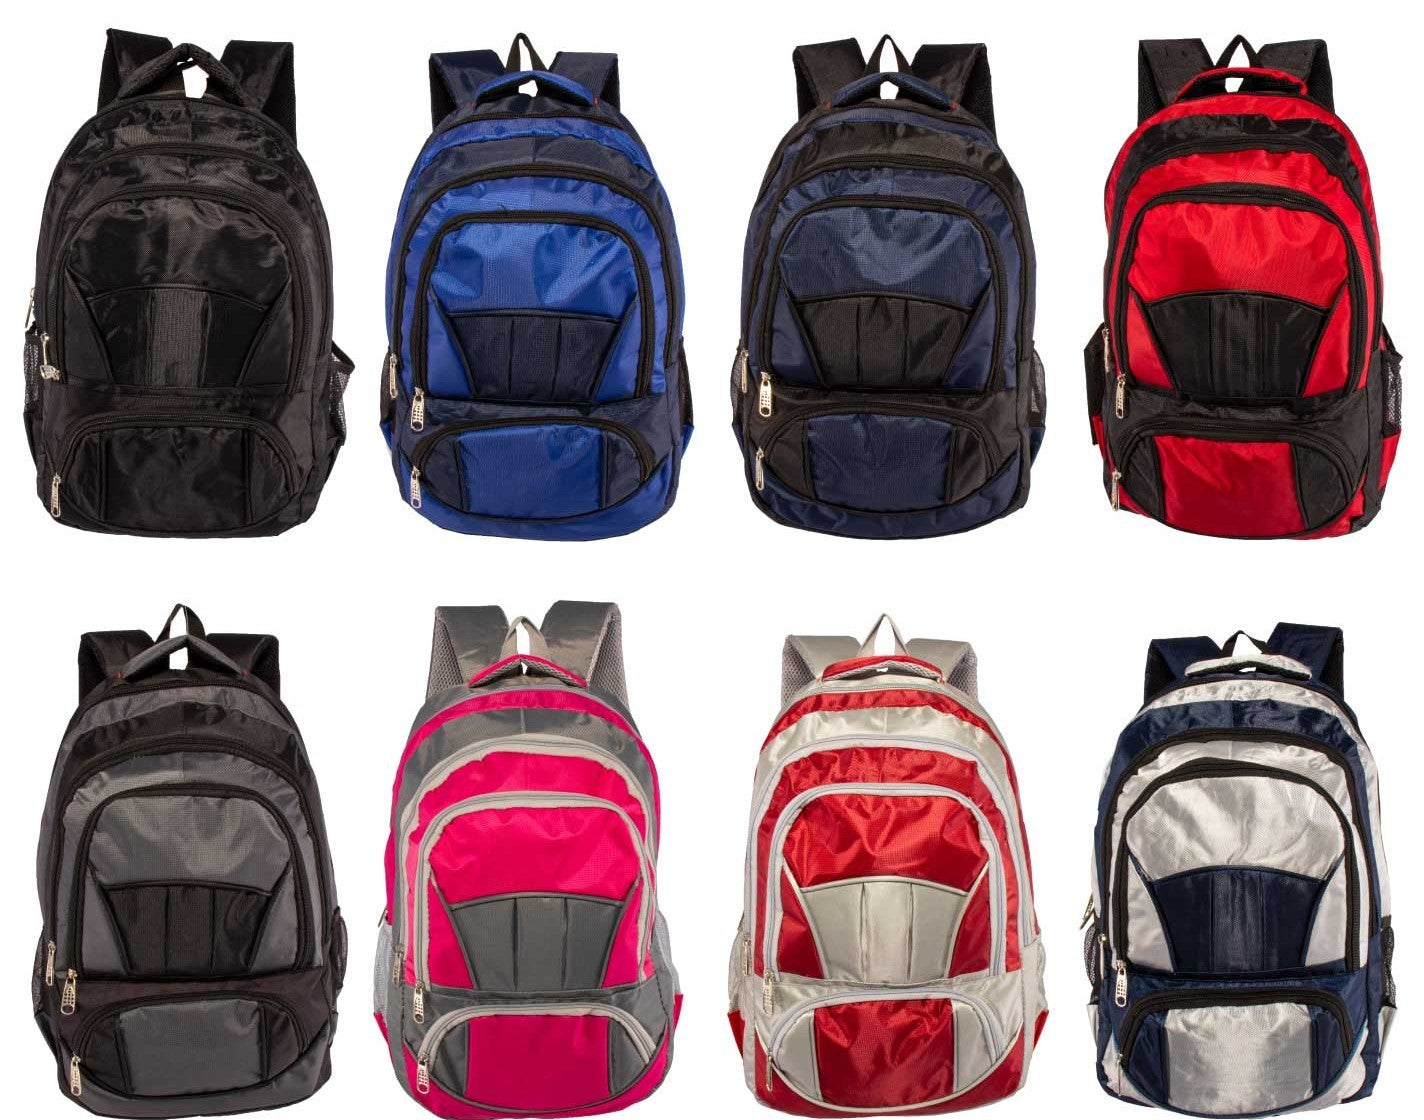 ''19'''' Premium Heavy Duty Two Tone BACKPACKs w/ Zip-Up Cargo Pockets - Assorted Colors''